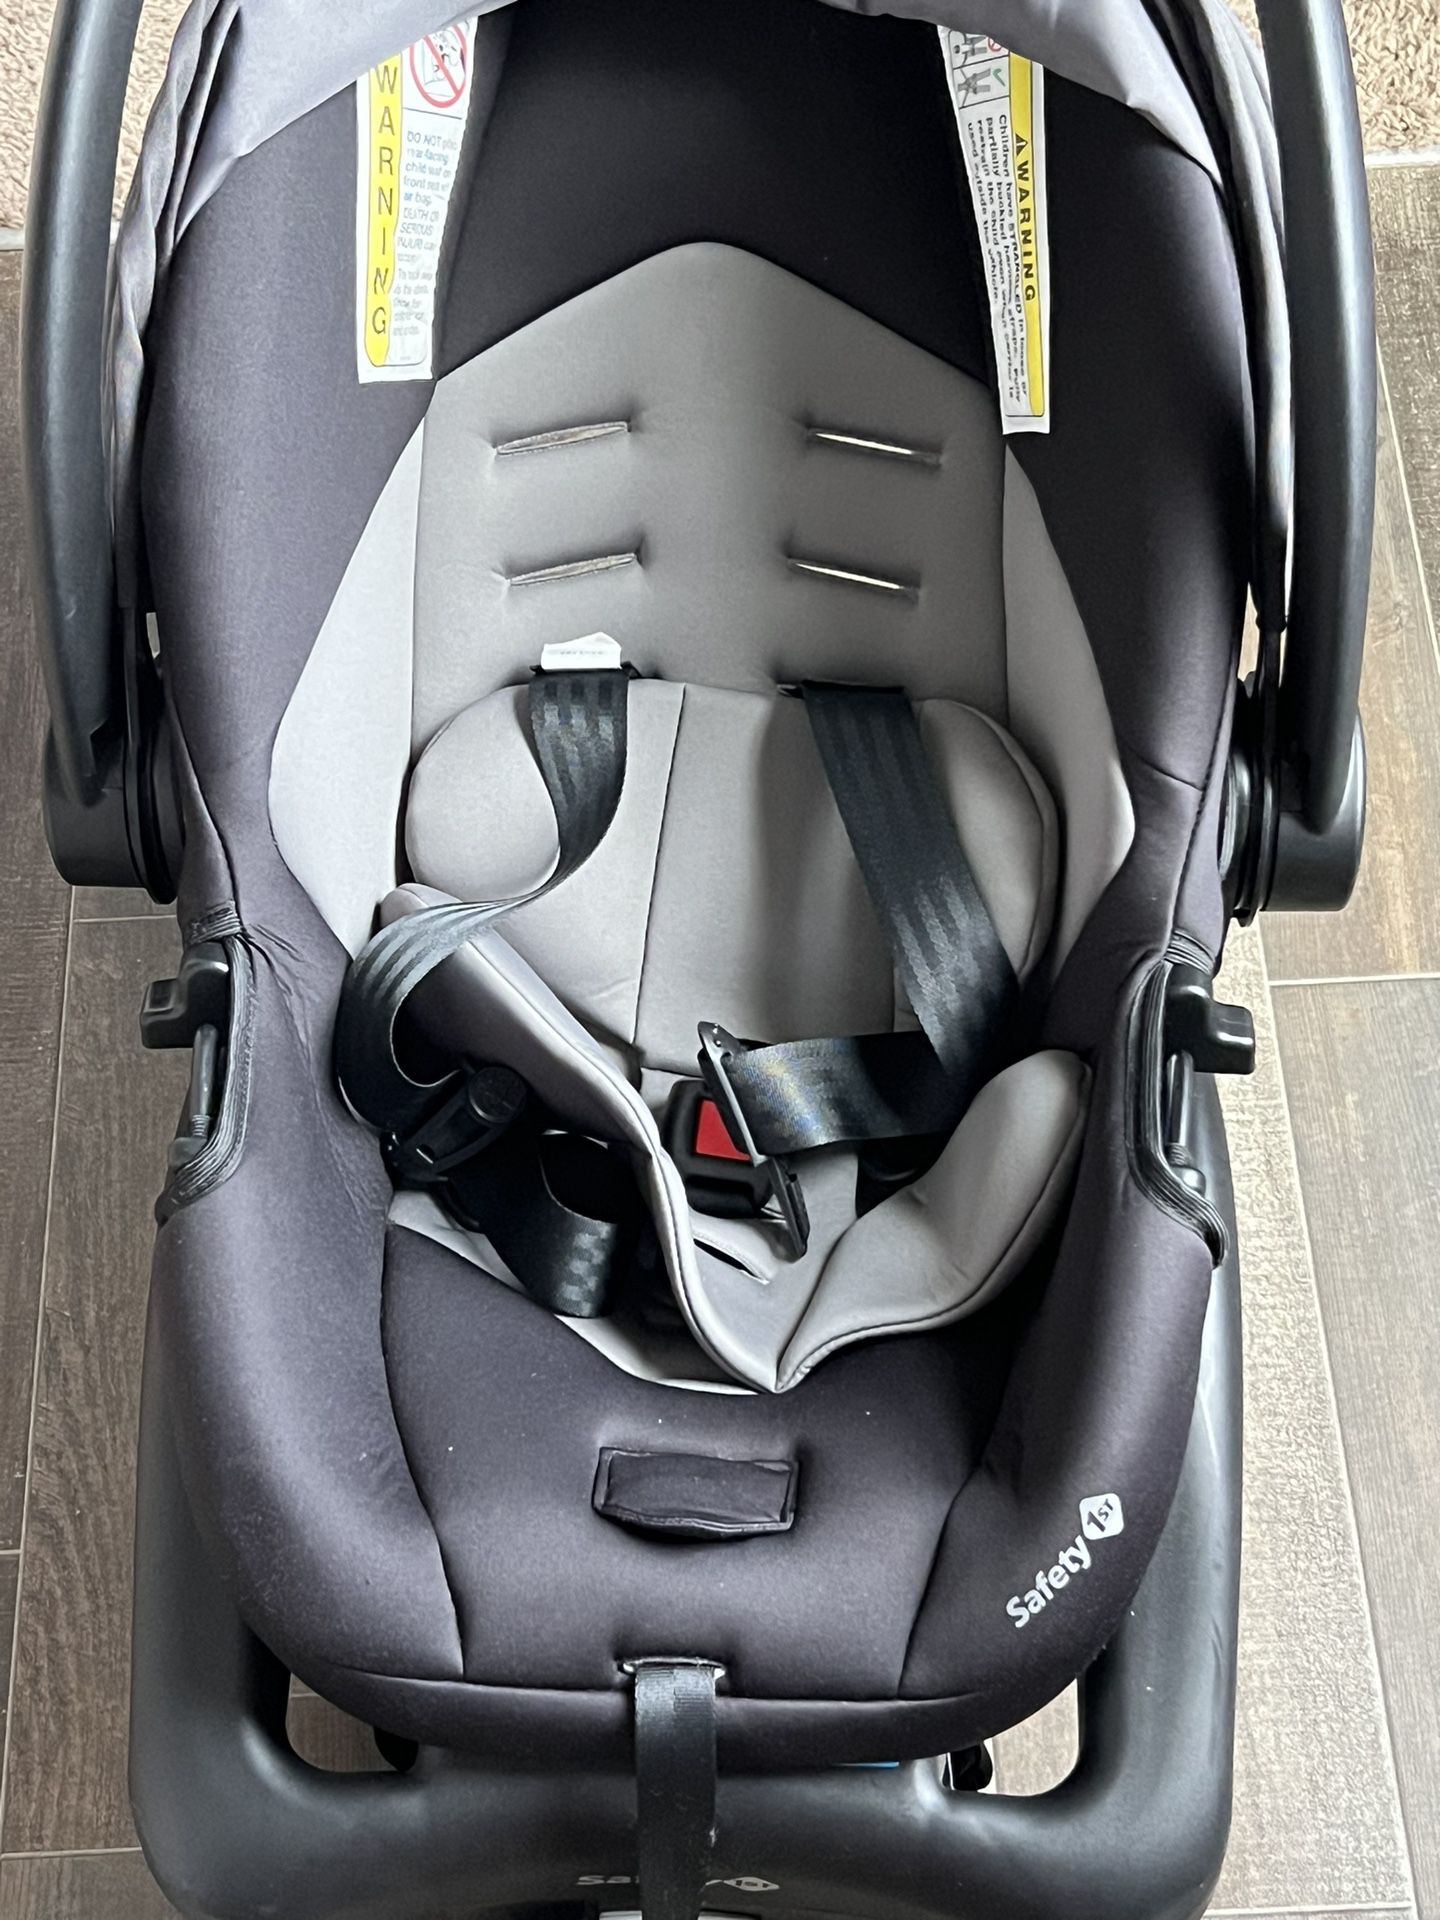  Safety 1st Car Seat